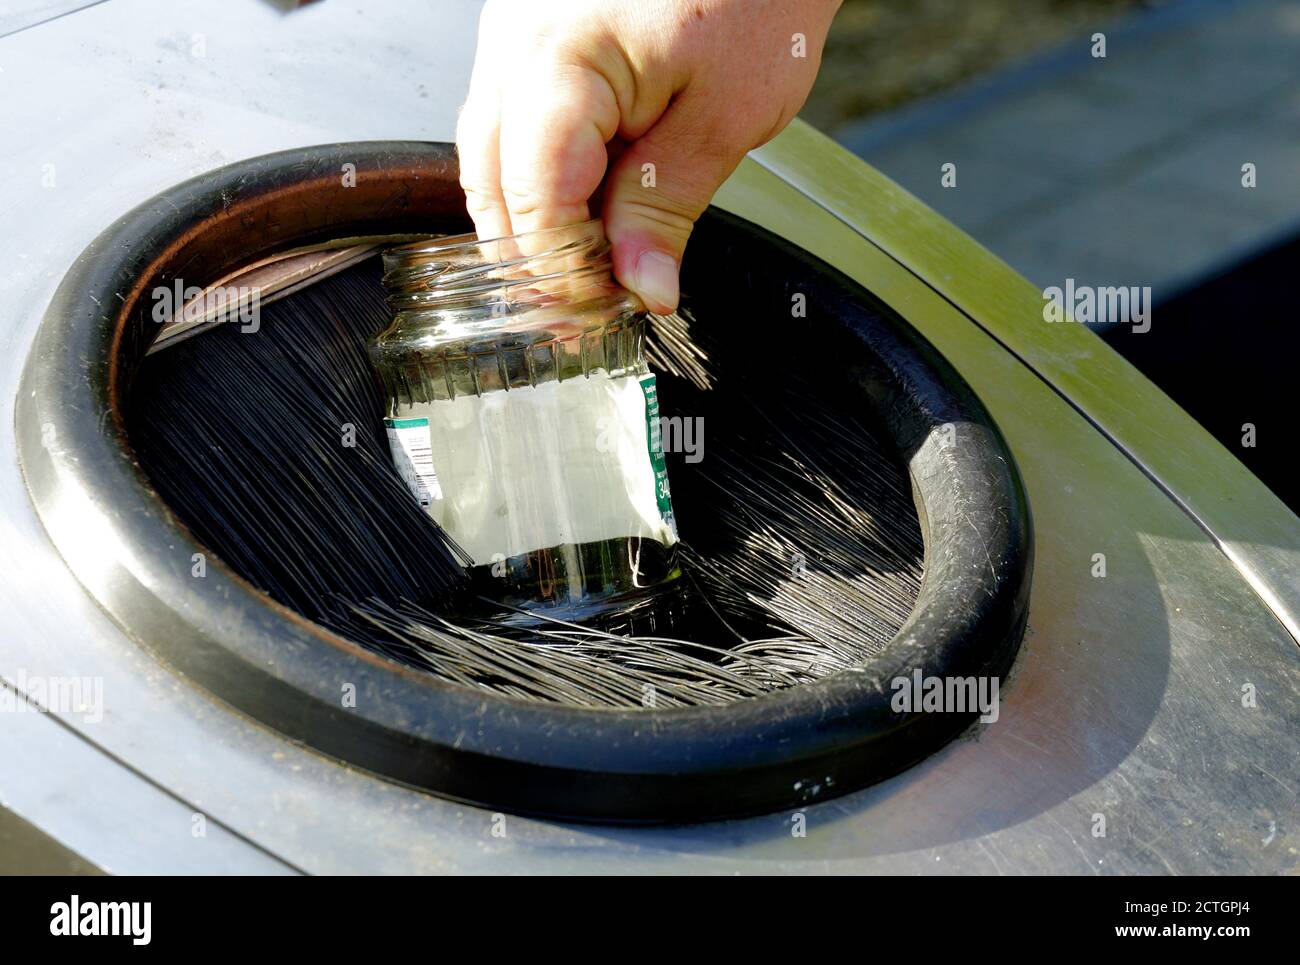 A man dropping empty glass jar into container for separation of home waste. A sign of awareness concerning environment, waste management, and climate. Stock Photo